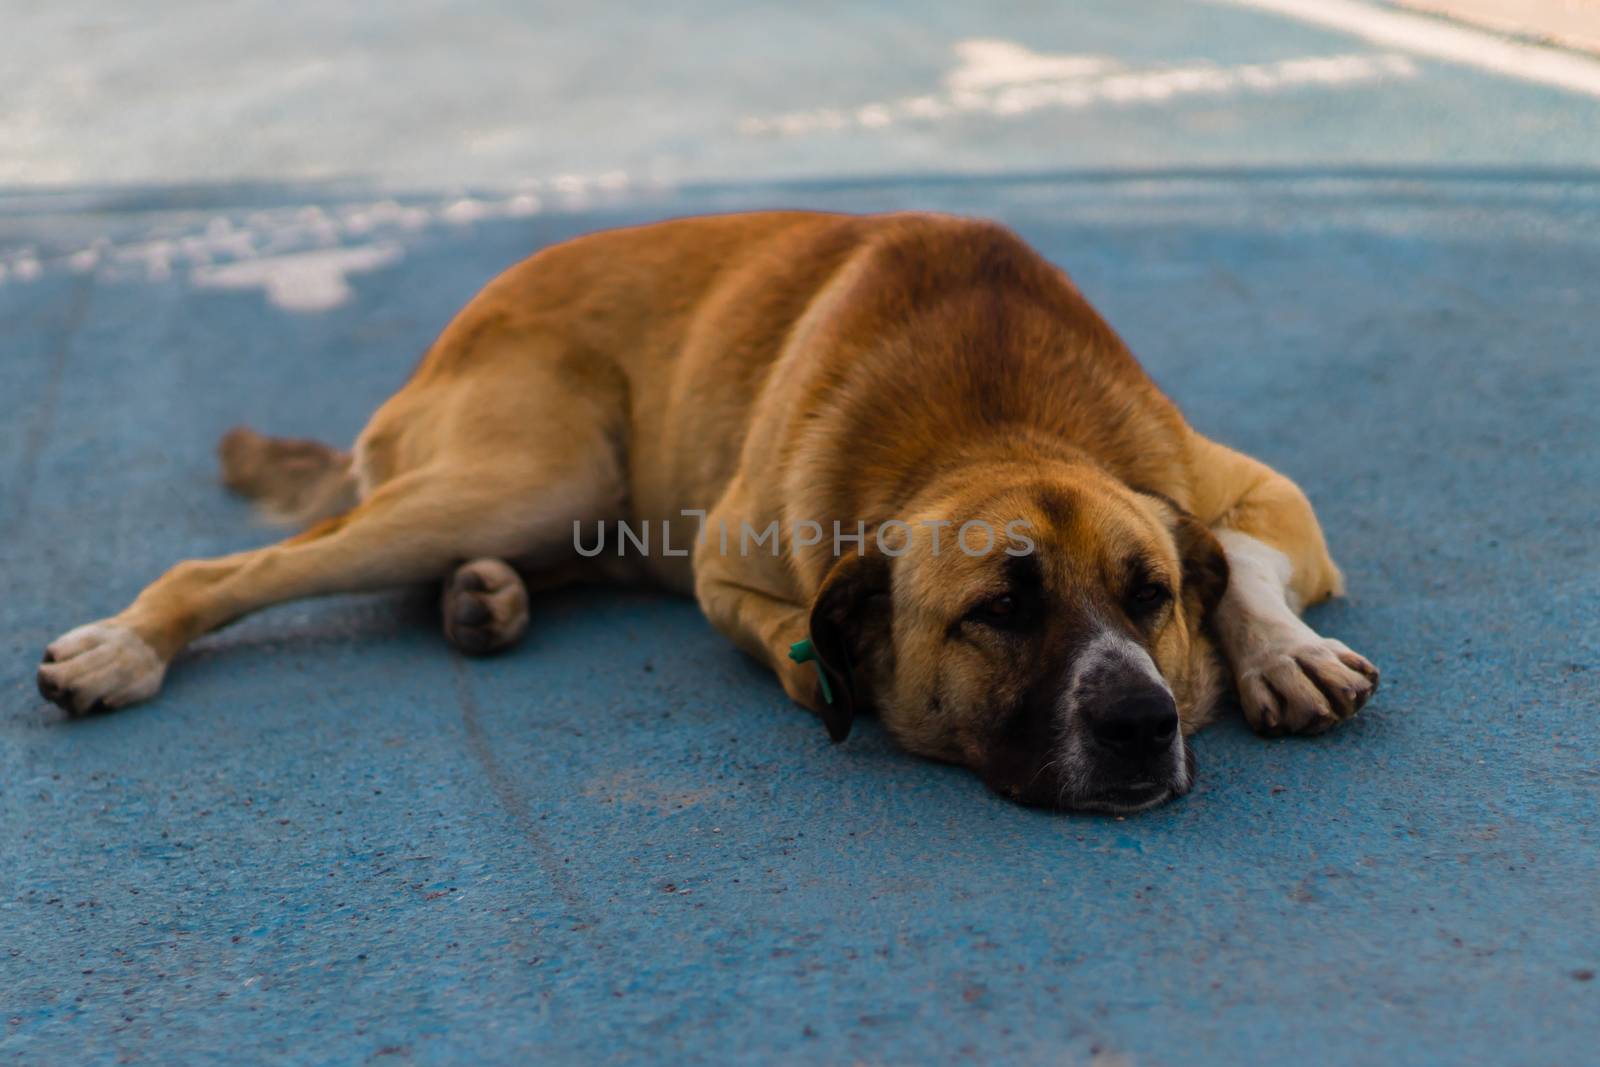 a cute and big sivas kangal dog laying on the floor by Swonie